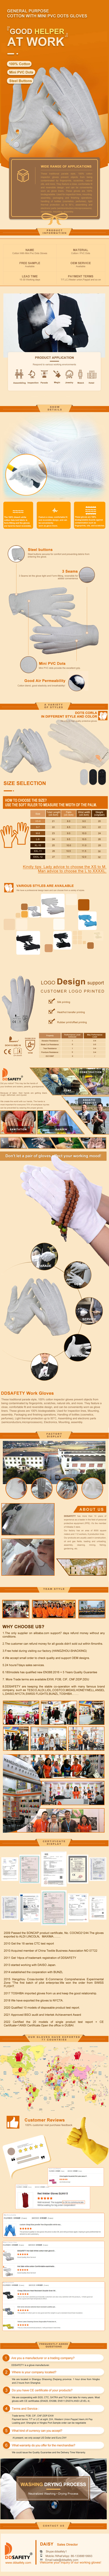 Bleach Beaded Parade Cotton Gloves with PVC Dots Grip - DCH113 Bleach Beaded Parade Cotton Gloves with PVC Dots Grip - DCH113 gloves,cotton gloves,Bleach Cotton Gloves,pvc dots gloves